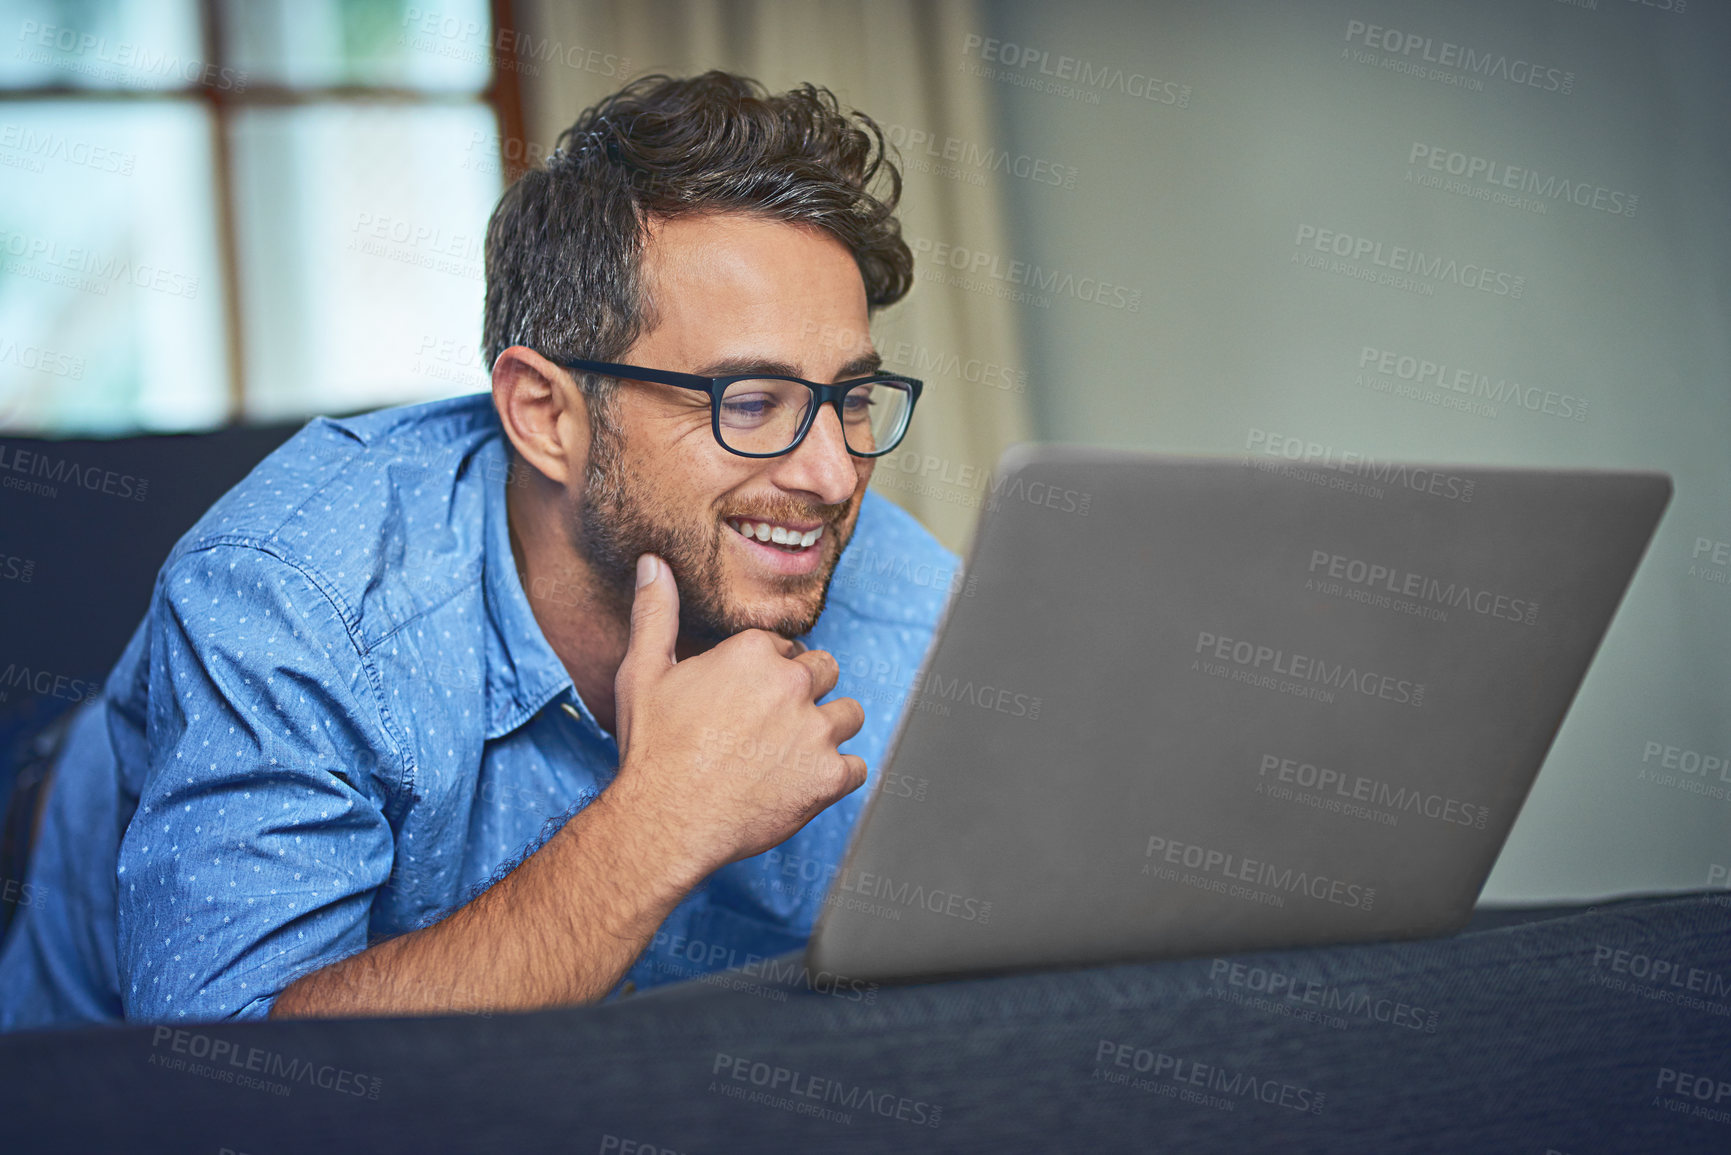 Buy stock photo Shot of a young man using a laptop on the sofa at home